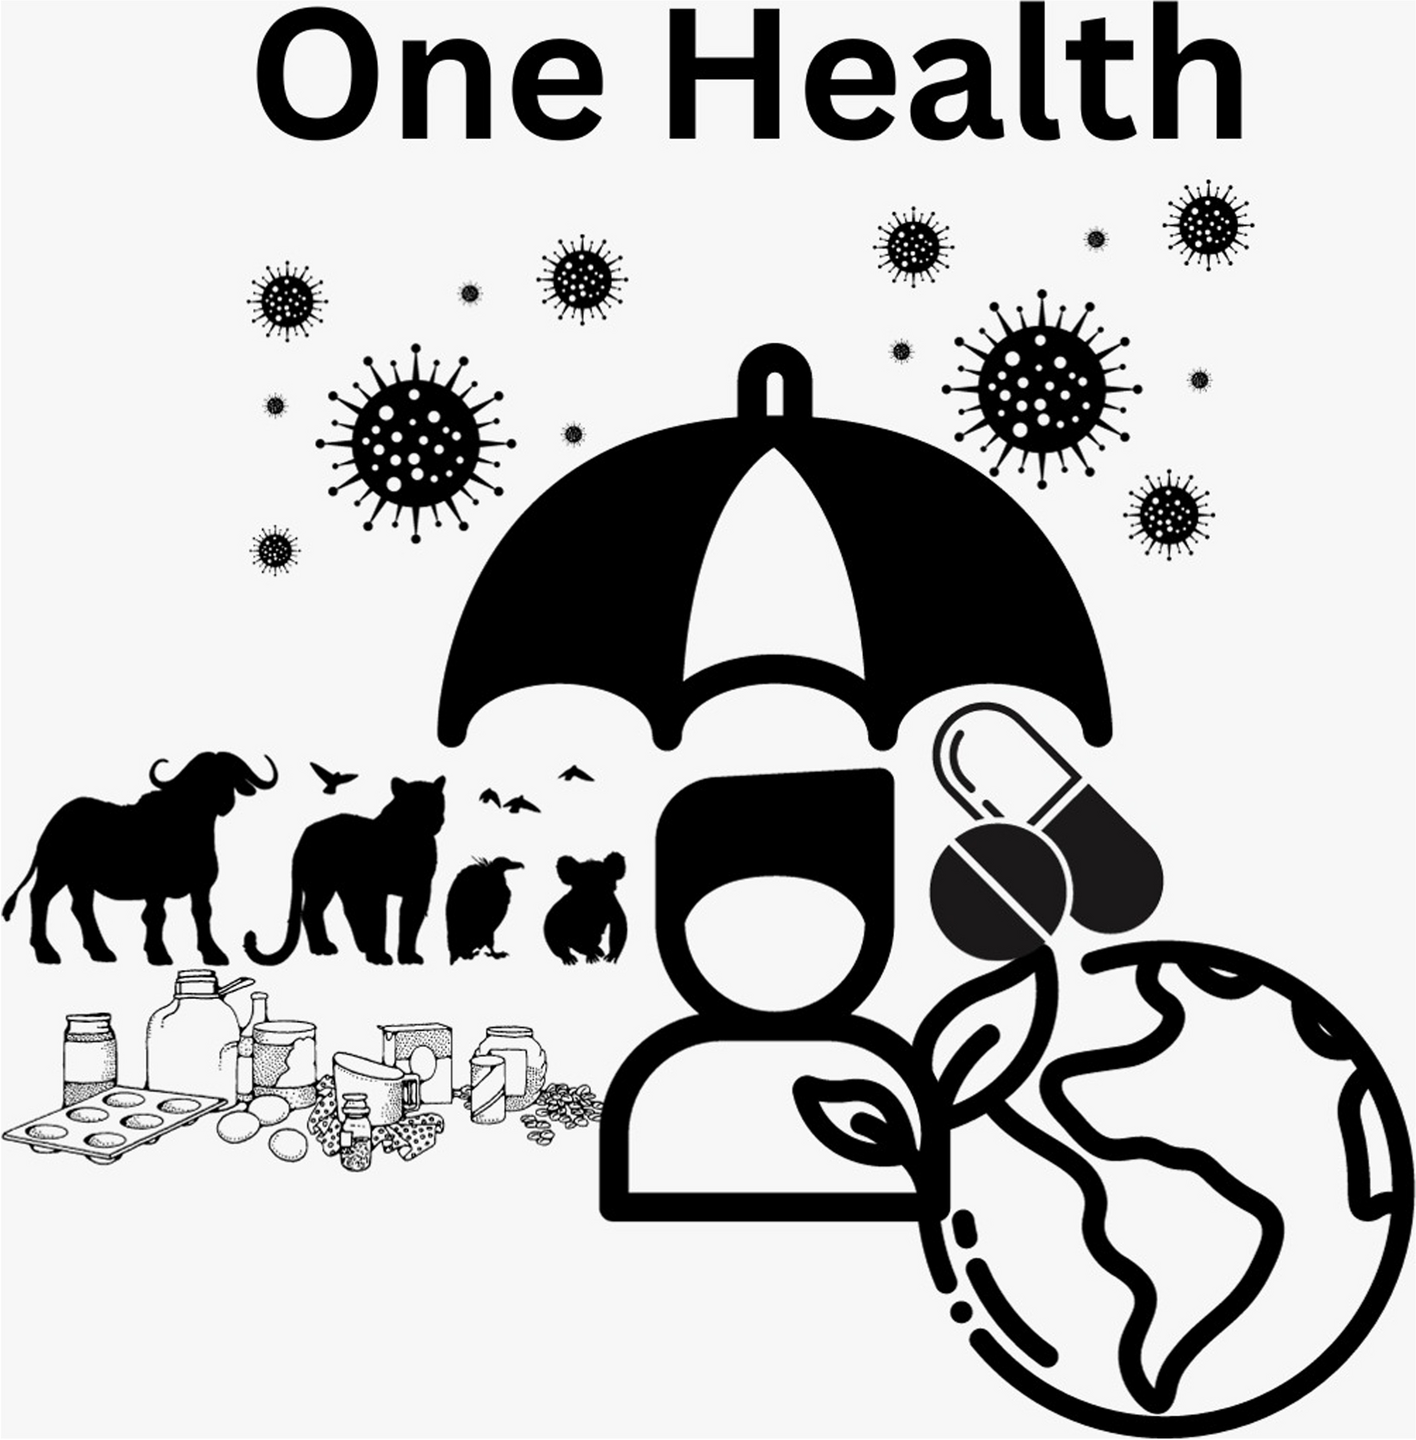 Promoting child health through a comprehensive One Health perspective: a narrative review